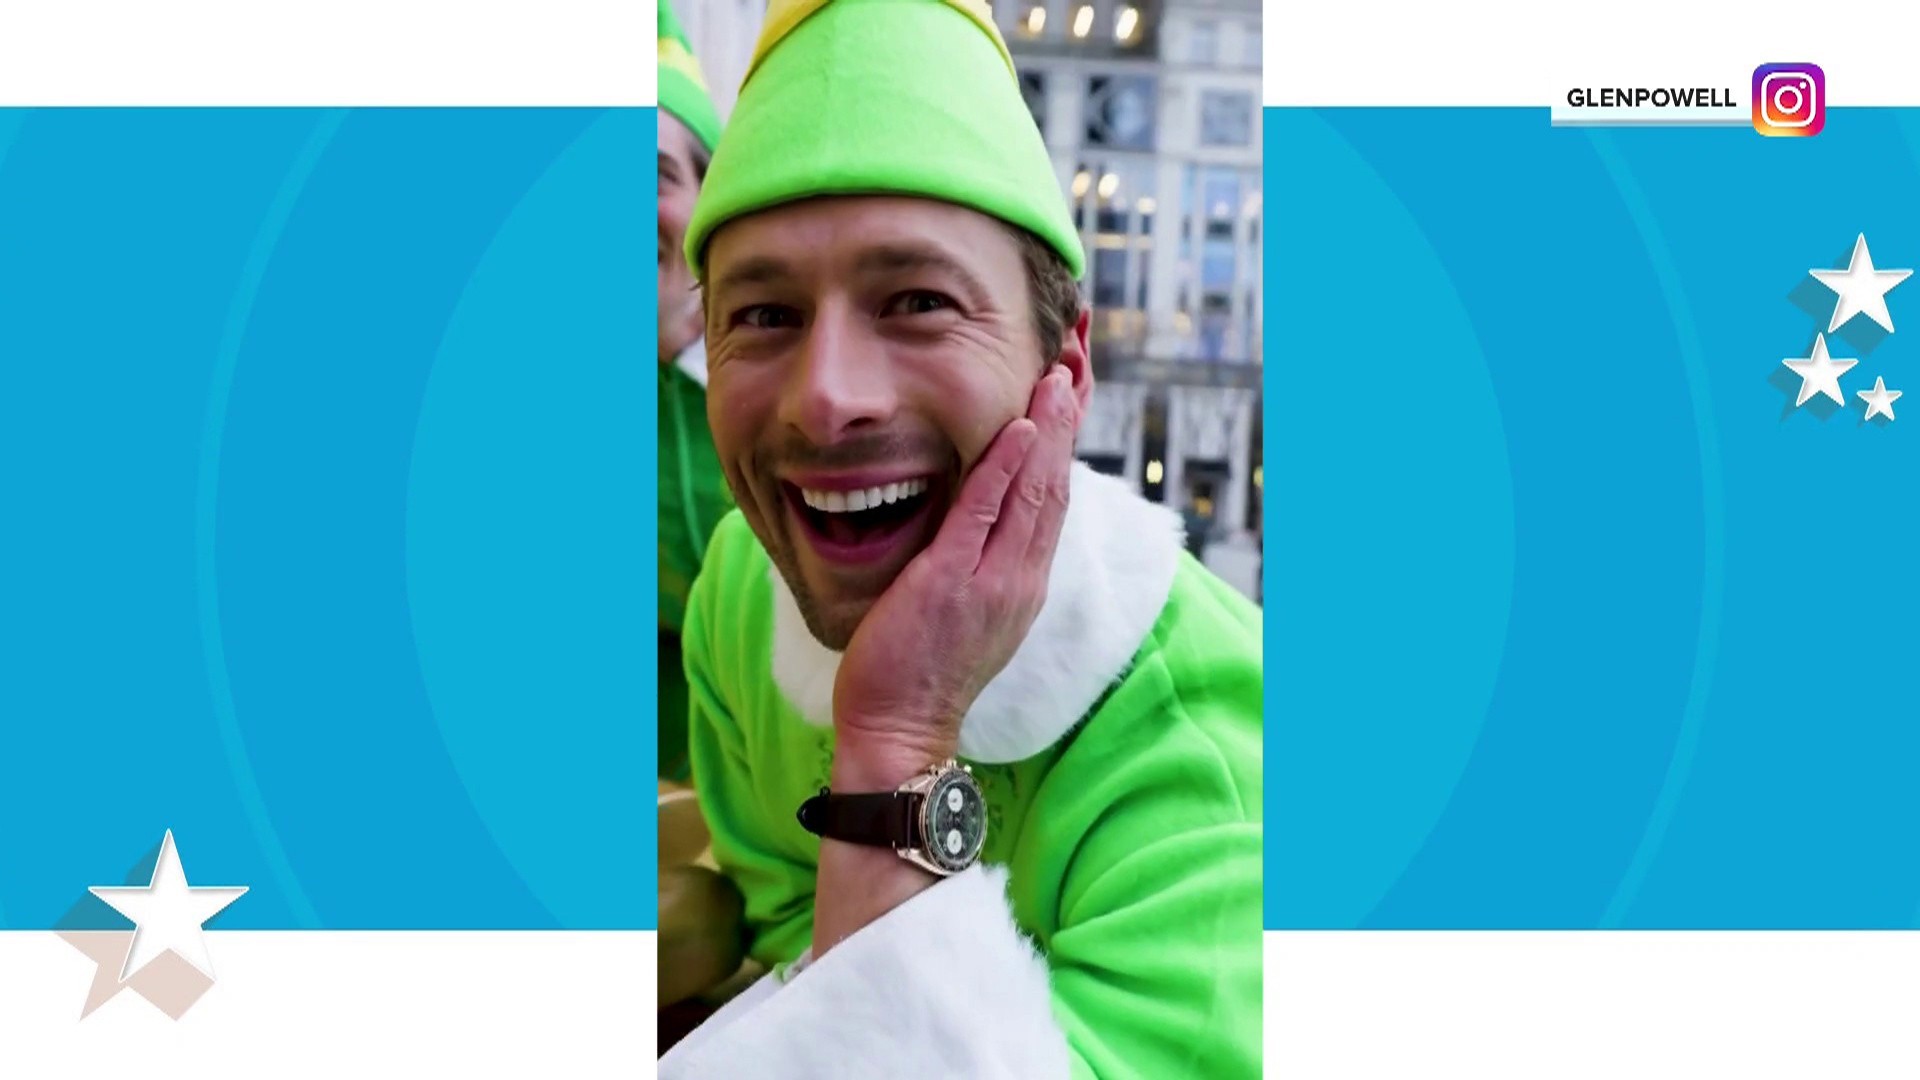 Glen Powell and family recreate scenes from 'Elf' in New York City